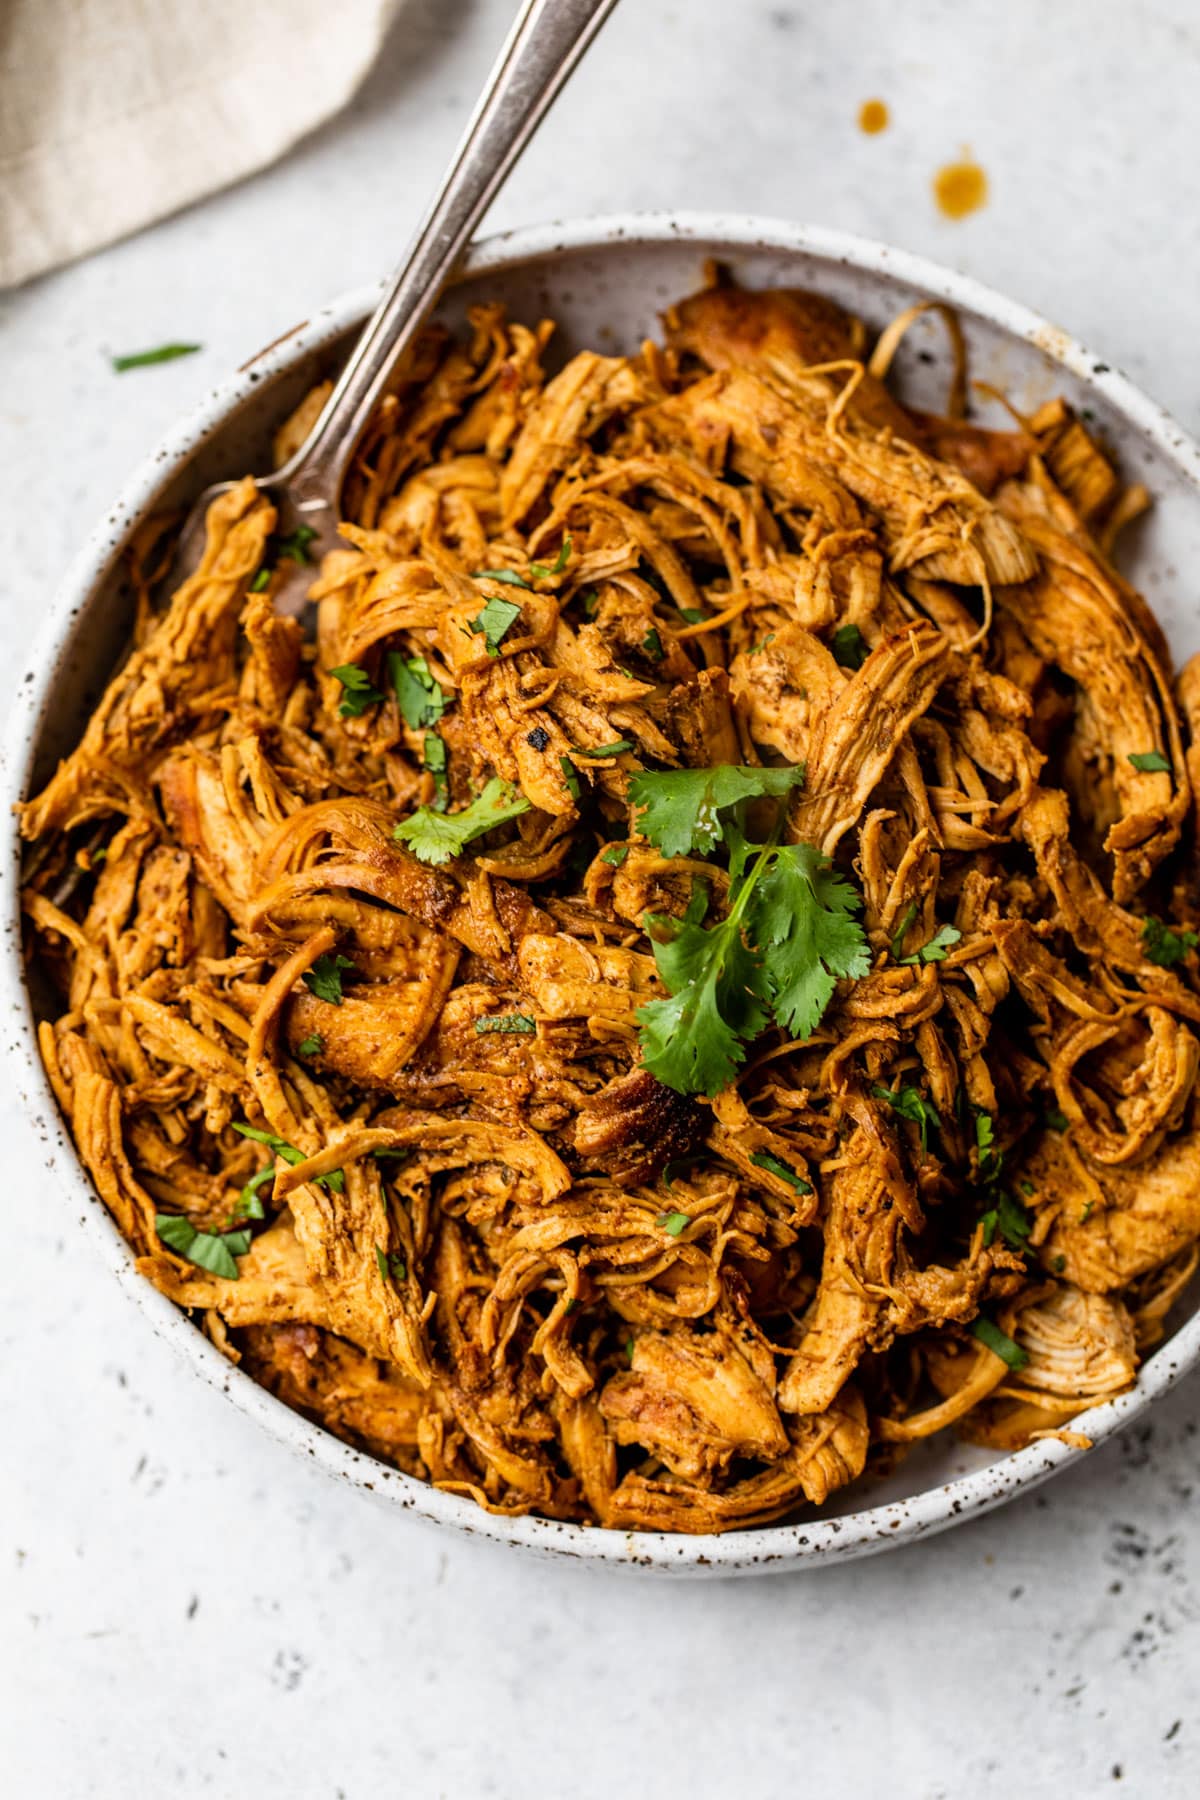 Spice Up Your Weeknights with Mexican Shredded Chicken